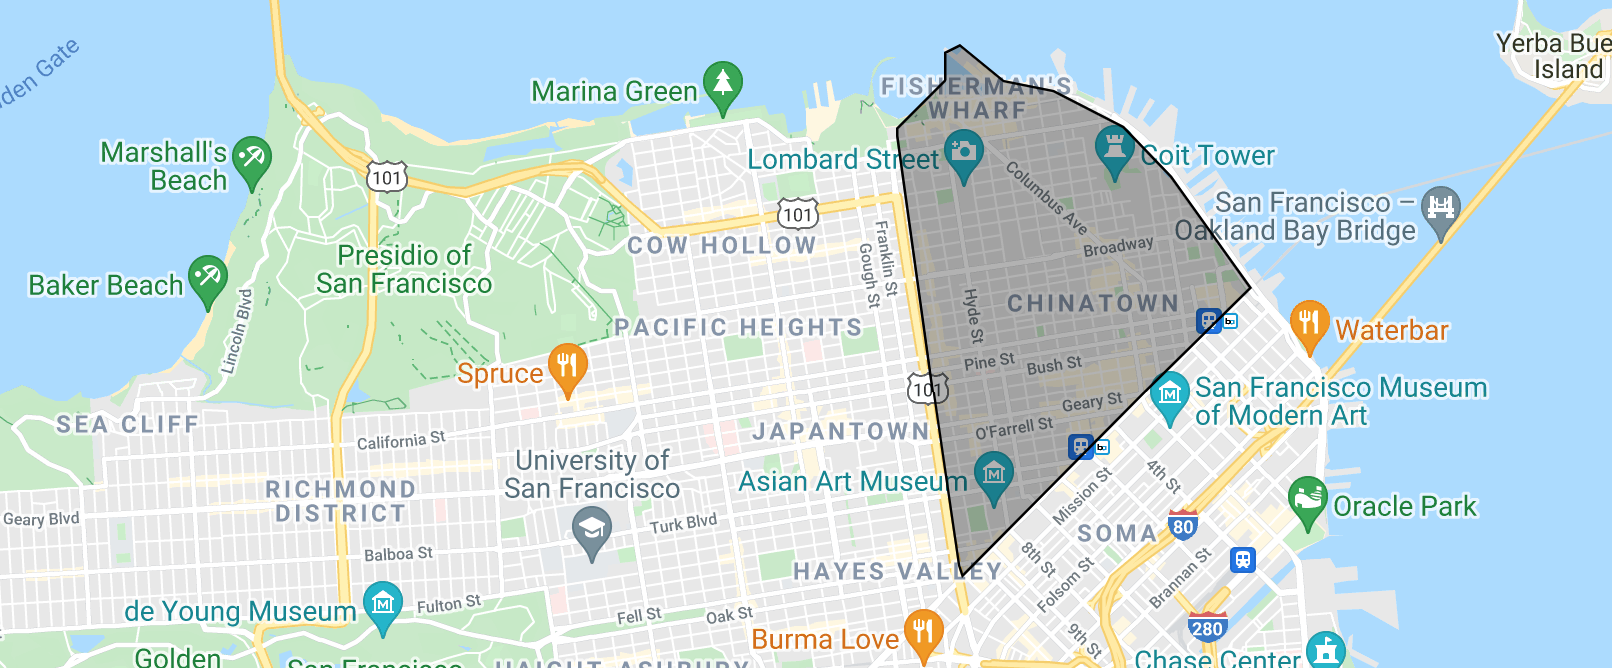 map of district 8 sf